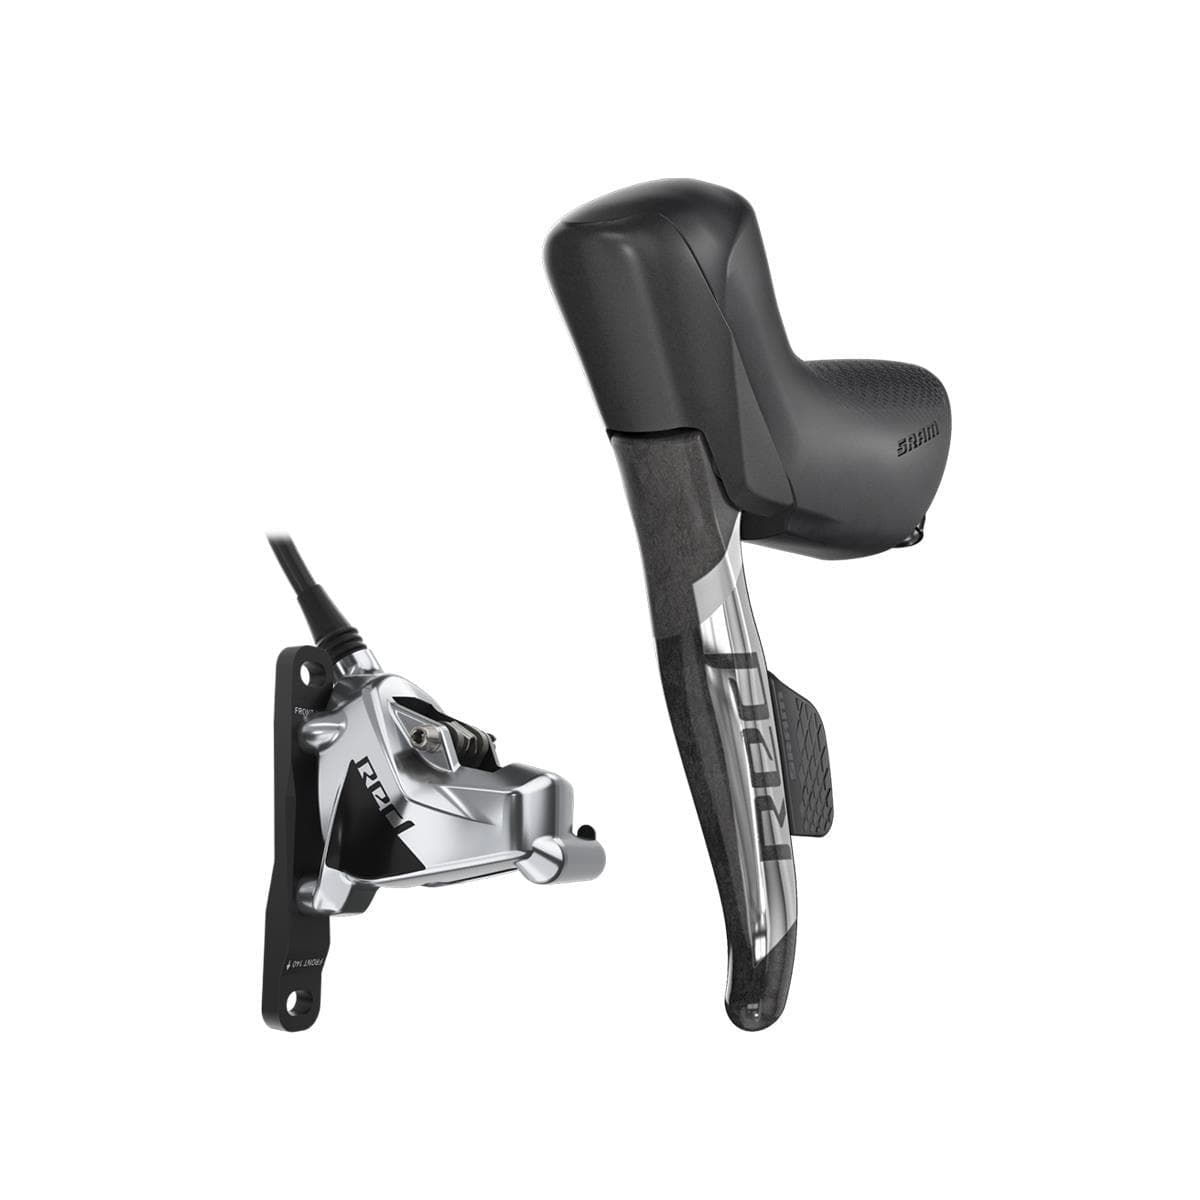 Sram Shift/Hydraulic Disc Brake Red Etap Axs D1 Stealthamajig Connected Front Brake/Left Shift 950Mm W/ Flat Mount 20Mm Ti Hardware 2 Piece Caliper (Rotor & Bracket Sold Separately):